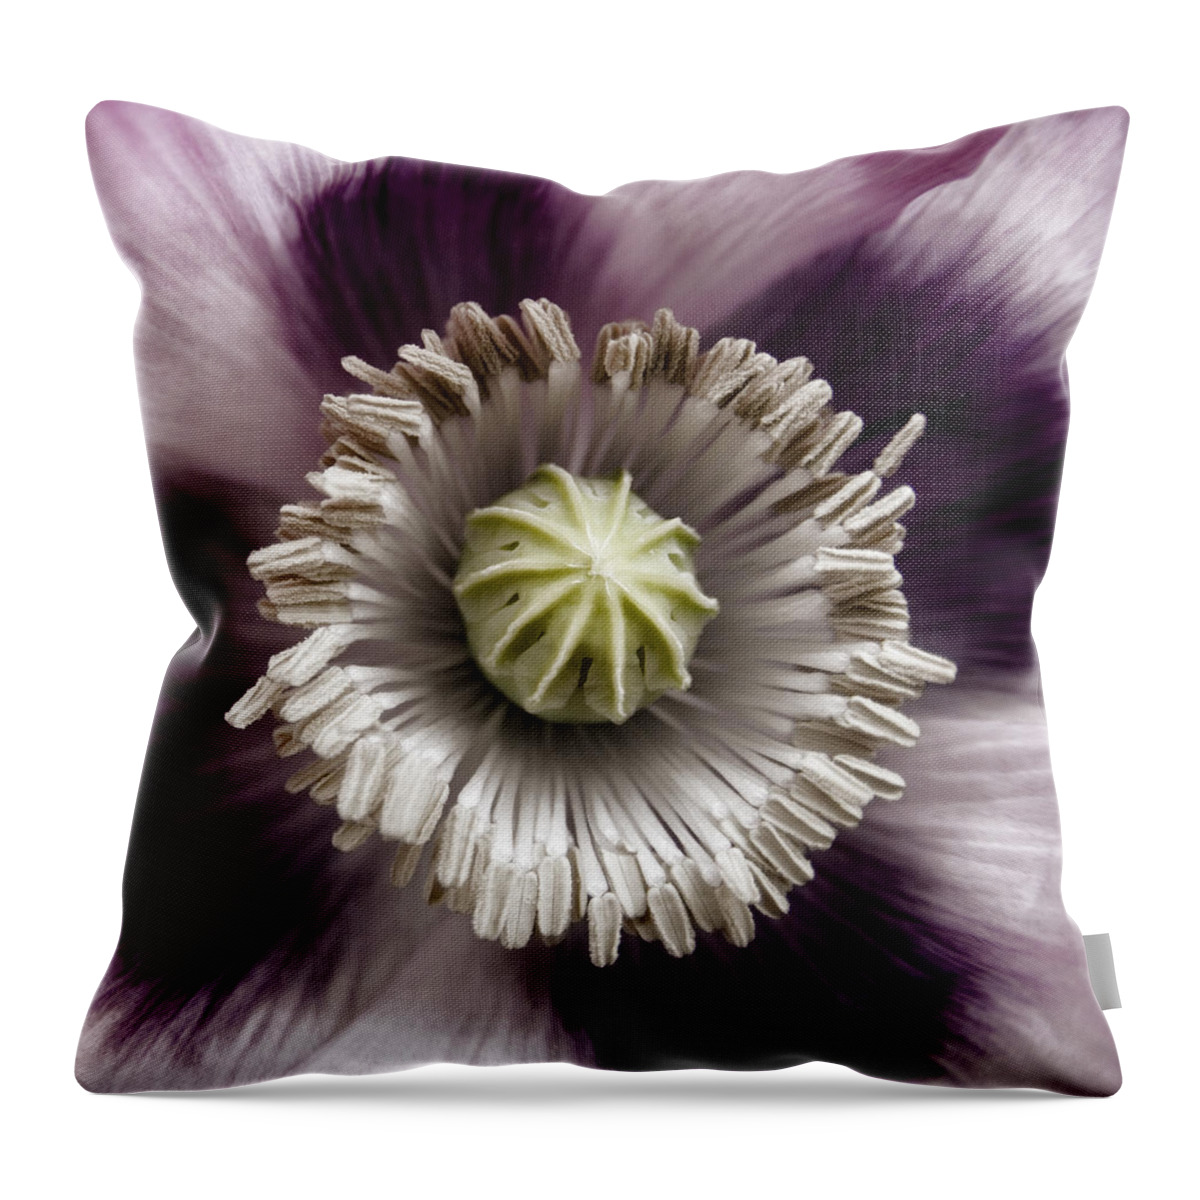 Poppy Throw Pillow featuring the photograph Opium Poppy #1 by Carol Leigh